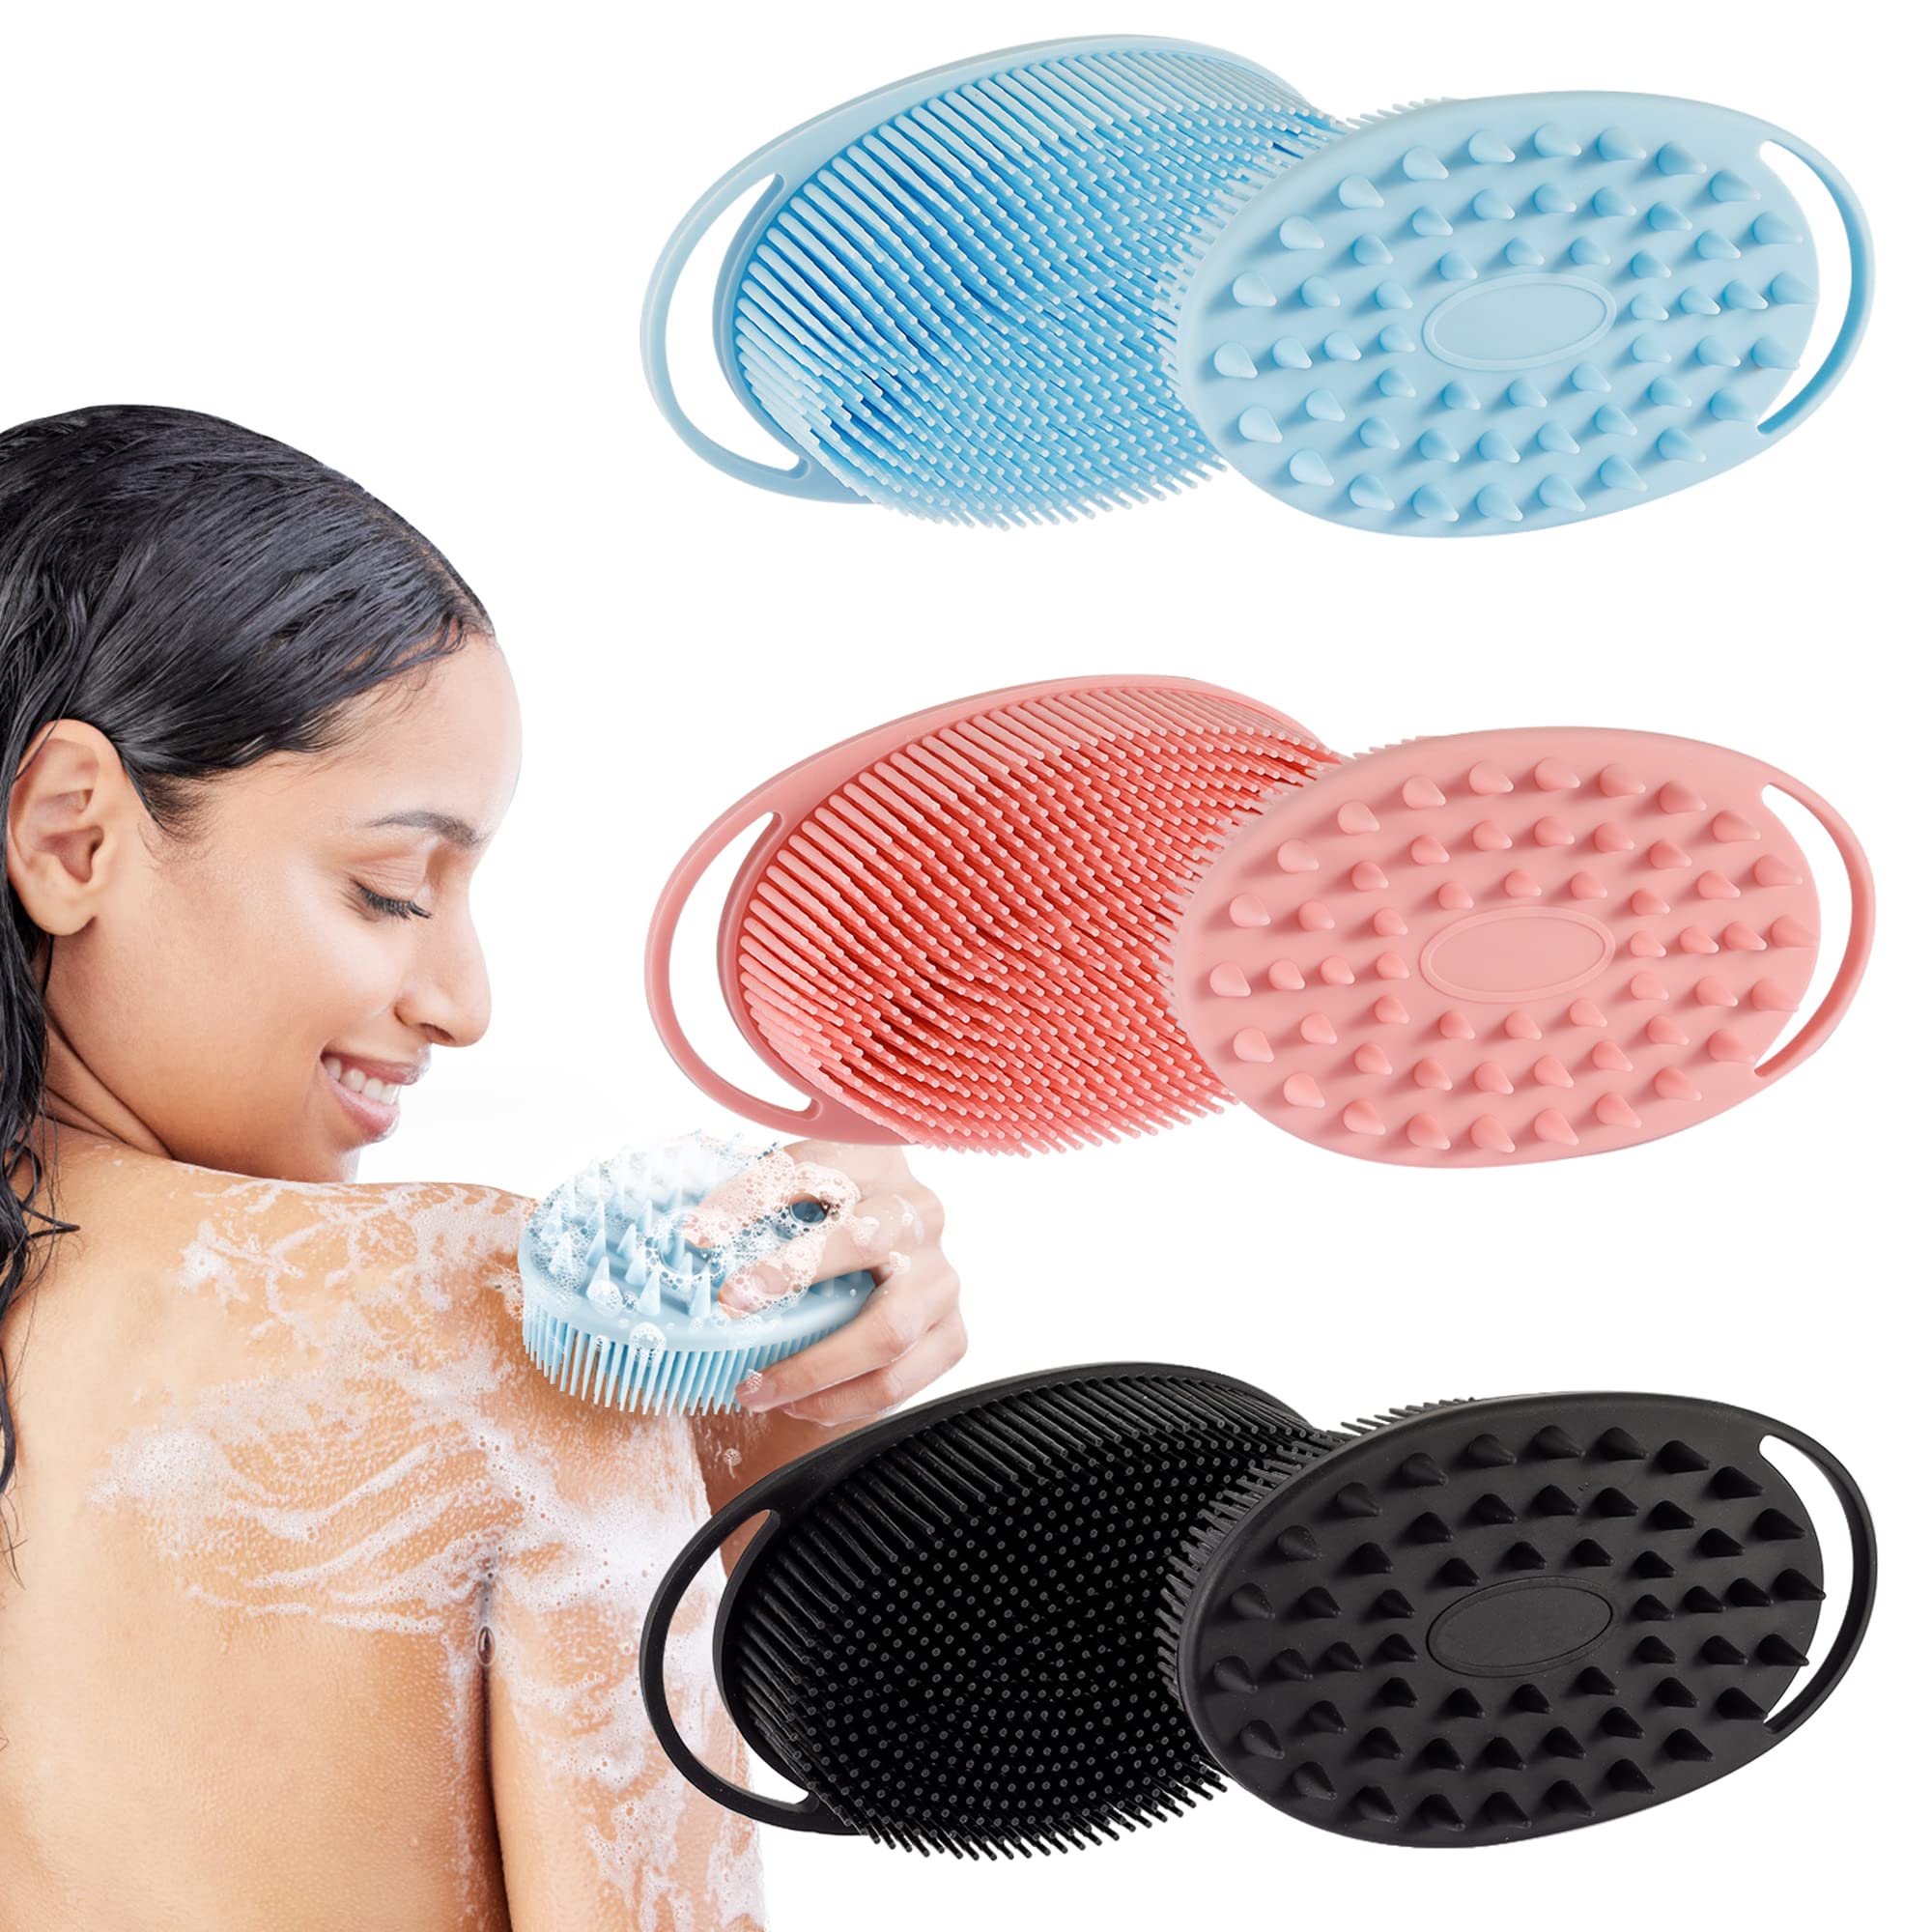 Ousiya Silicone Body Scrubber Loofah Exfoliating Body Brush Shower Scrubber  for Kids Women Men All Kinds of Skin(3 Pack) Pink/Blue/Black